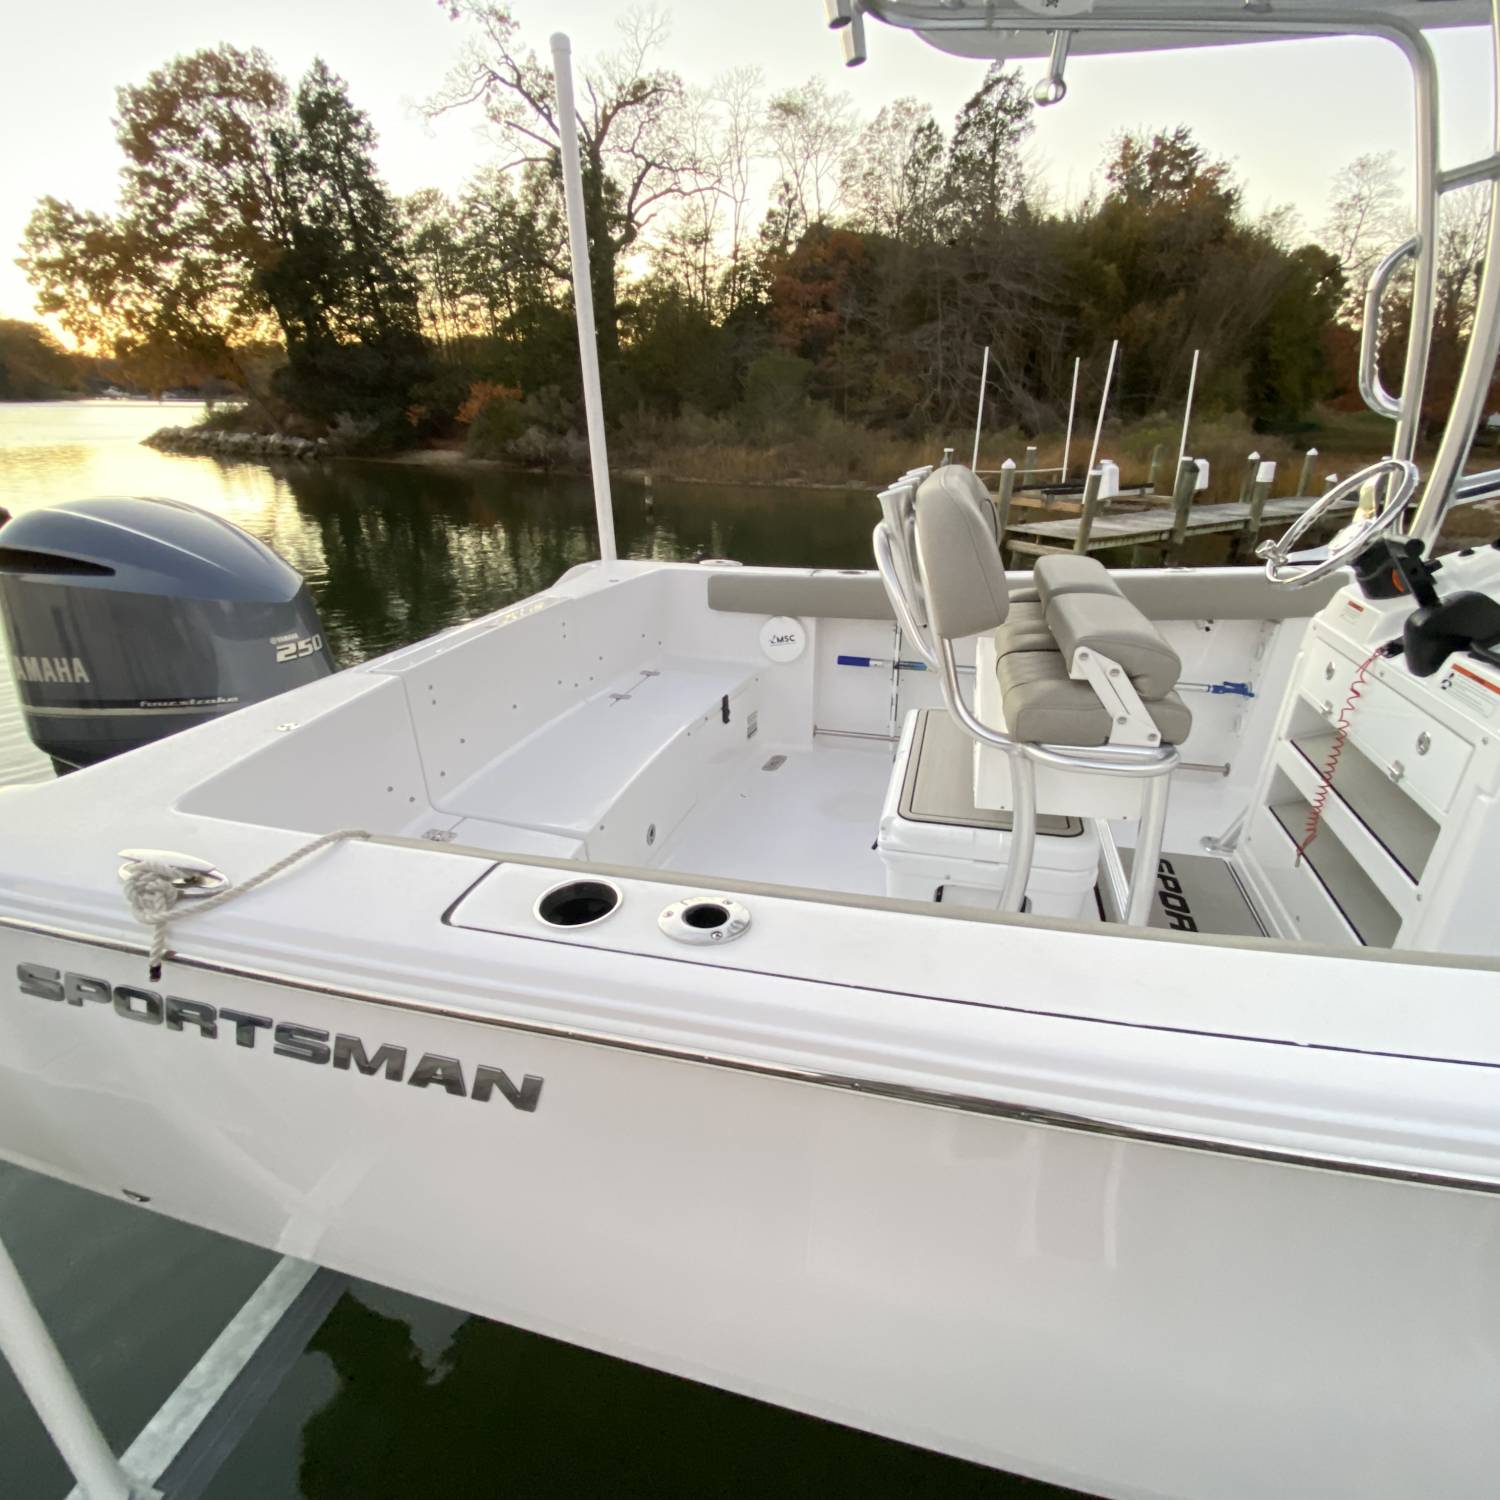 Title: Clean Machine 🐟 - On board their Sportsman Heritage 231 Center Console - Location: Solomon Island Md. Participating in the Photo Contest #SportsmanFebruary2022